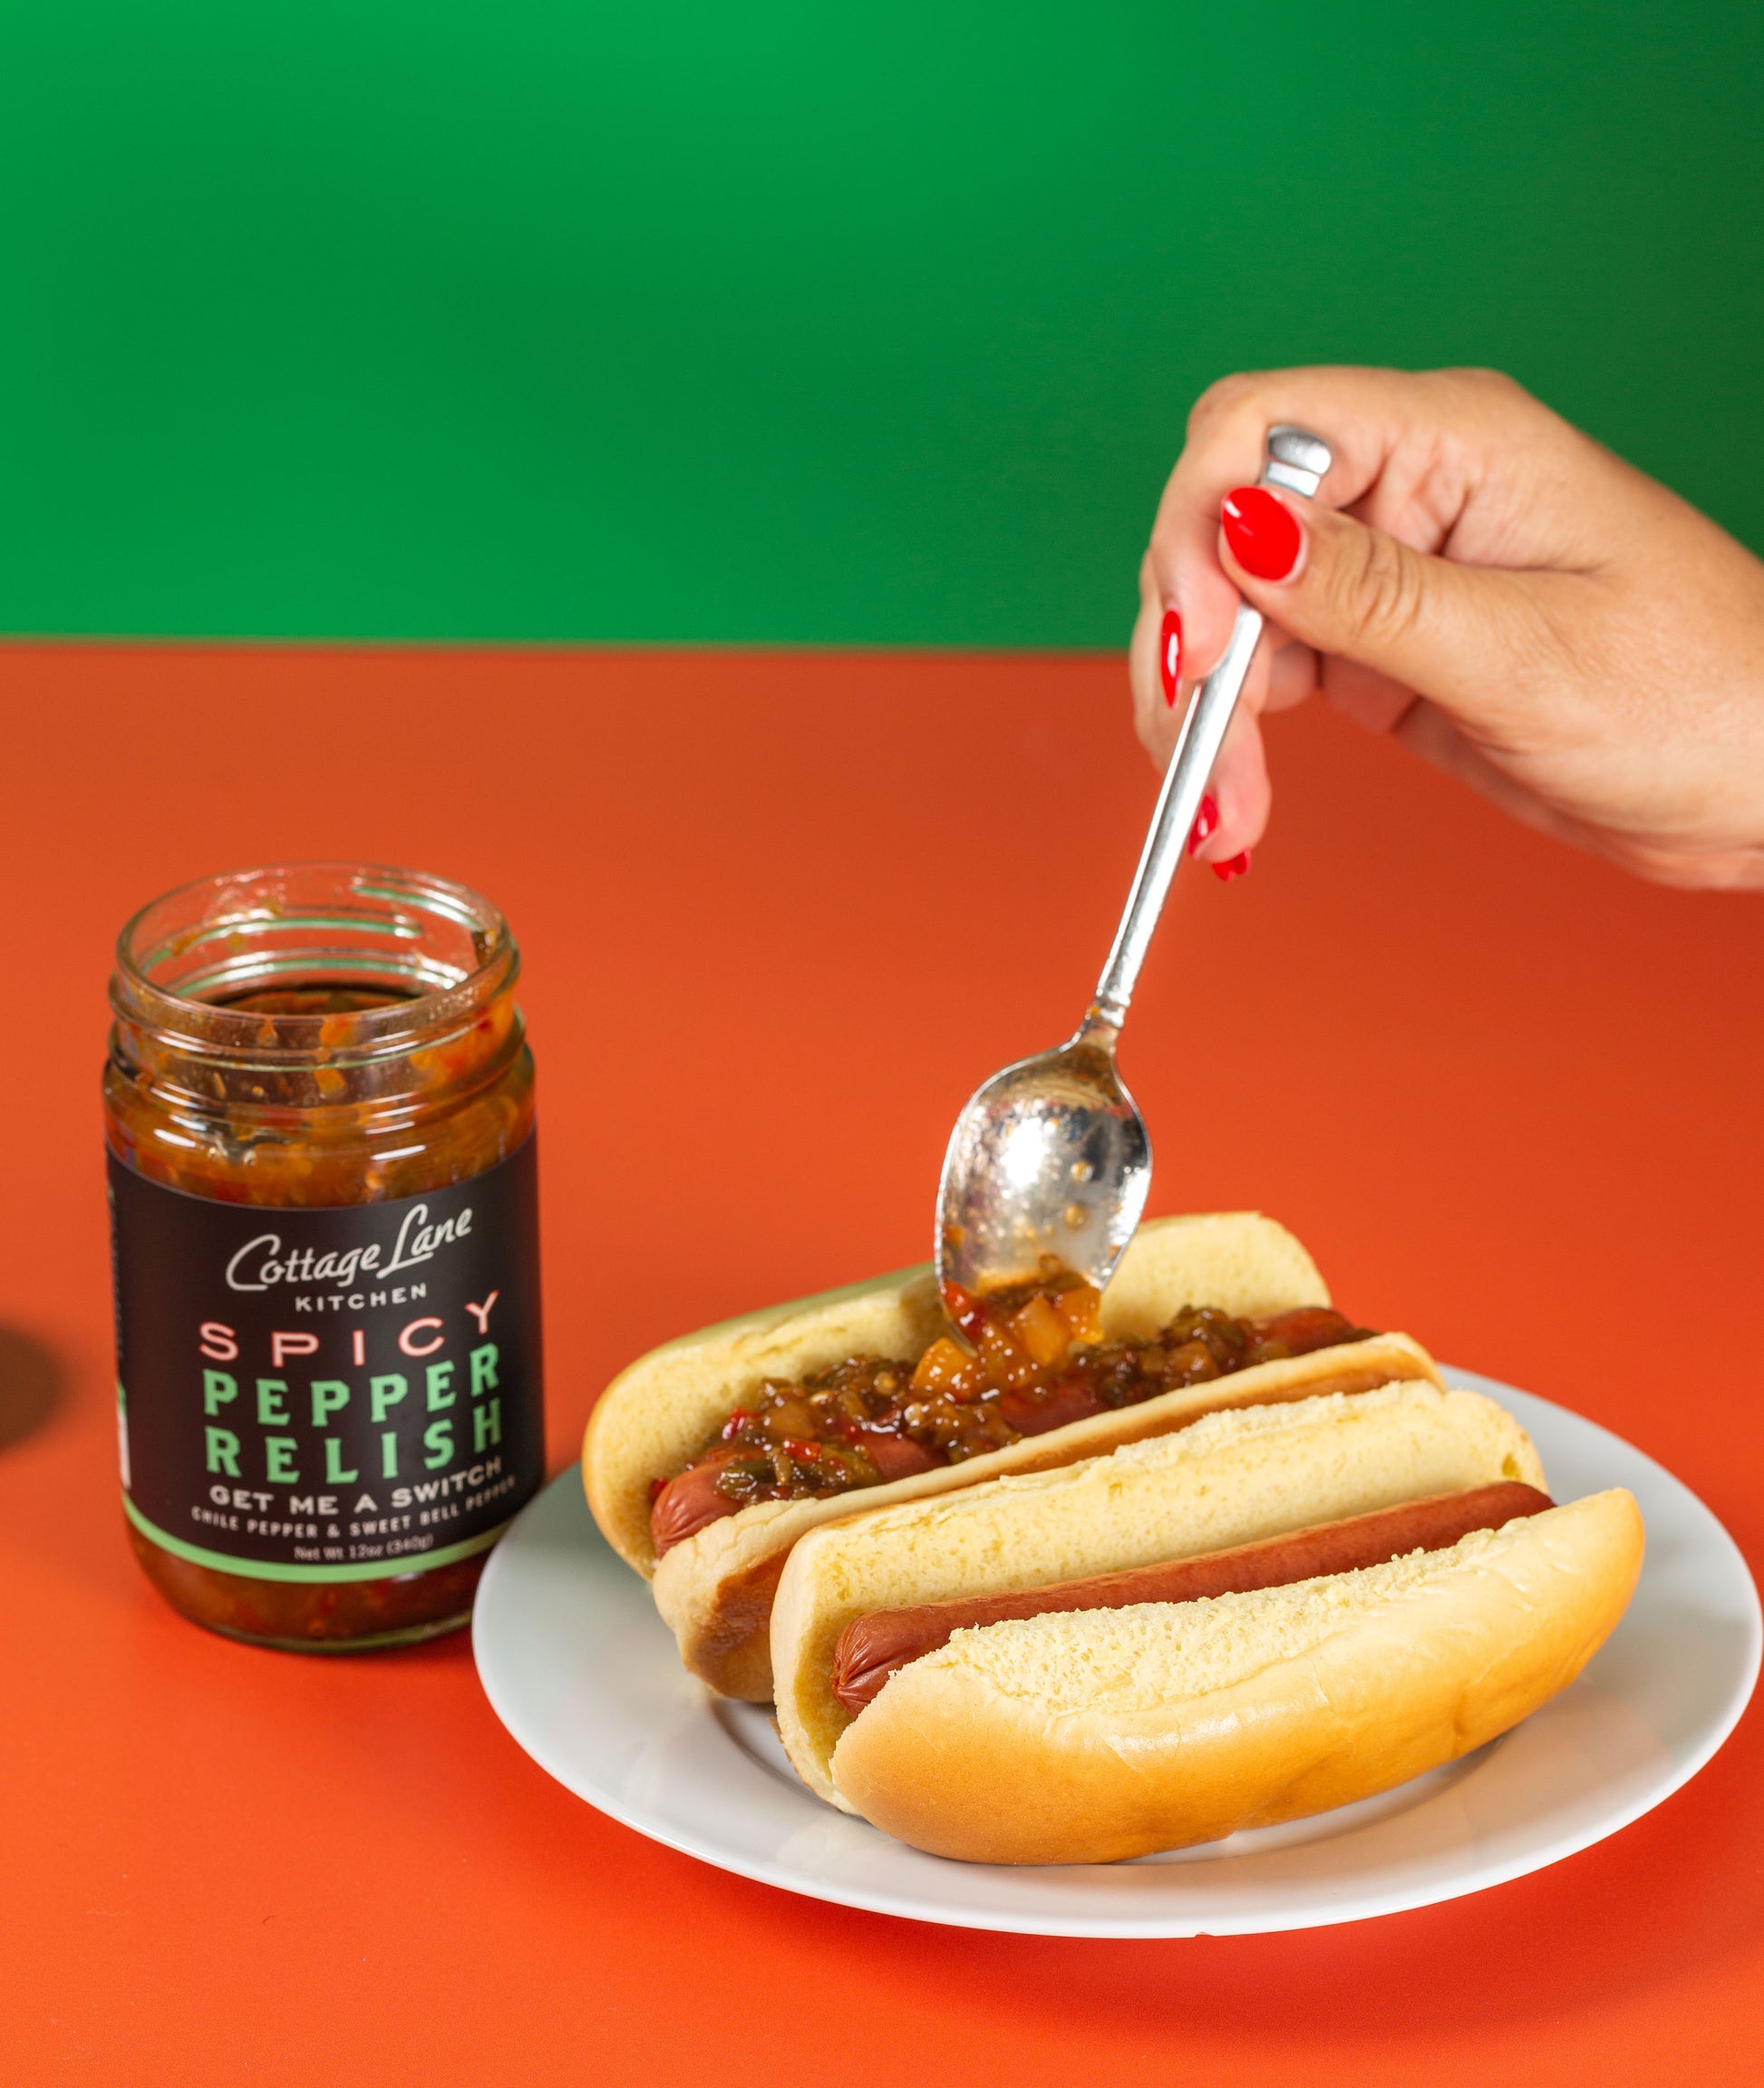 hand putting The Switch Spicy Pepper relish on hotdogs